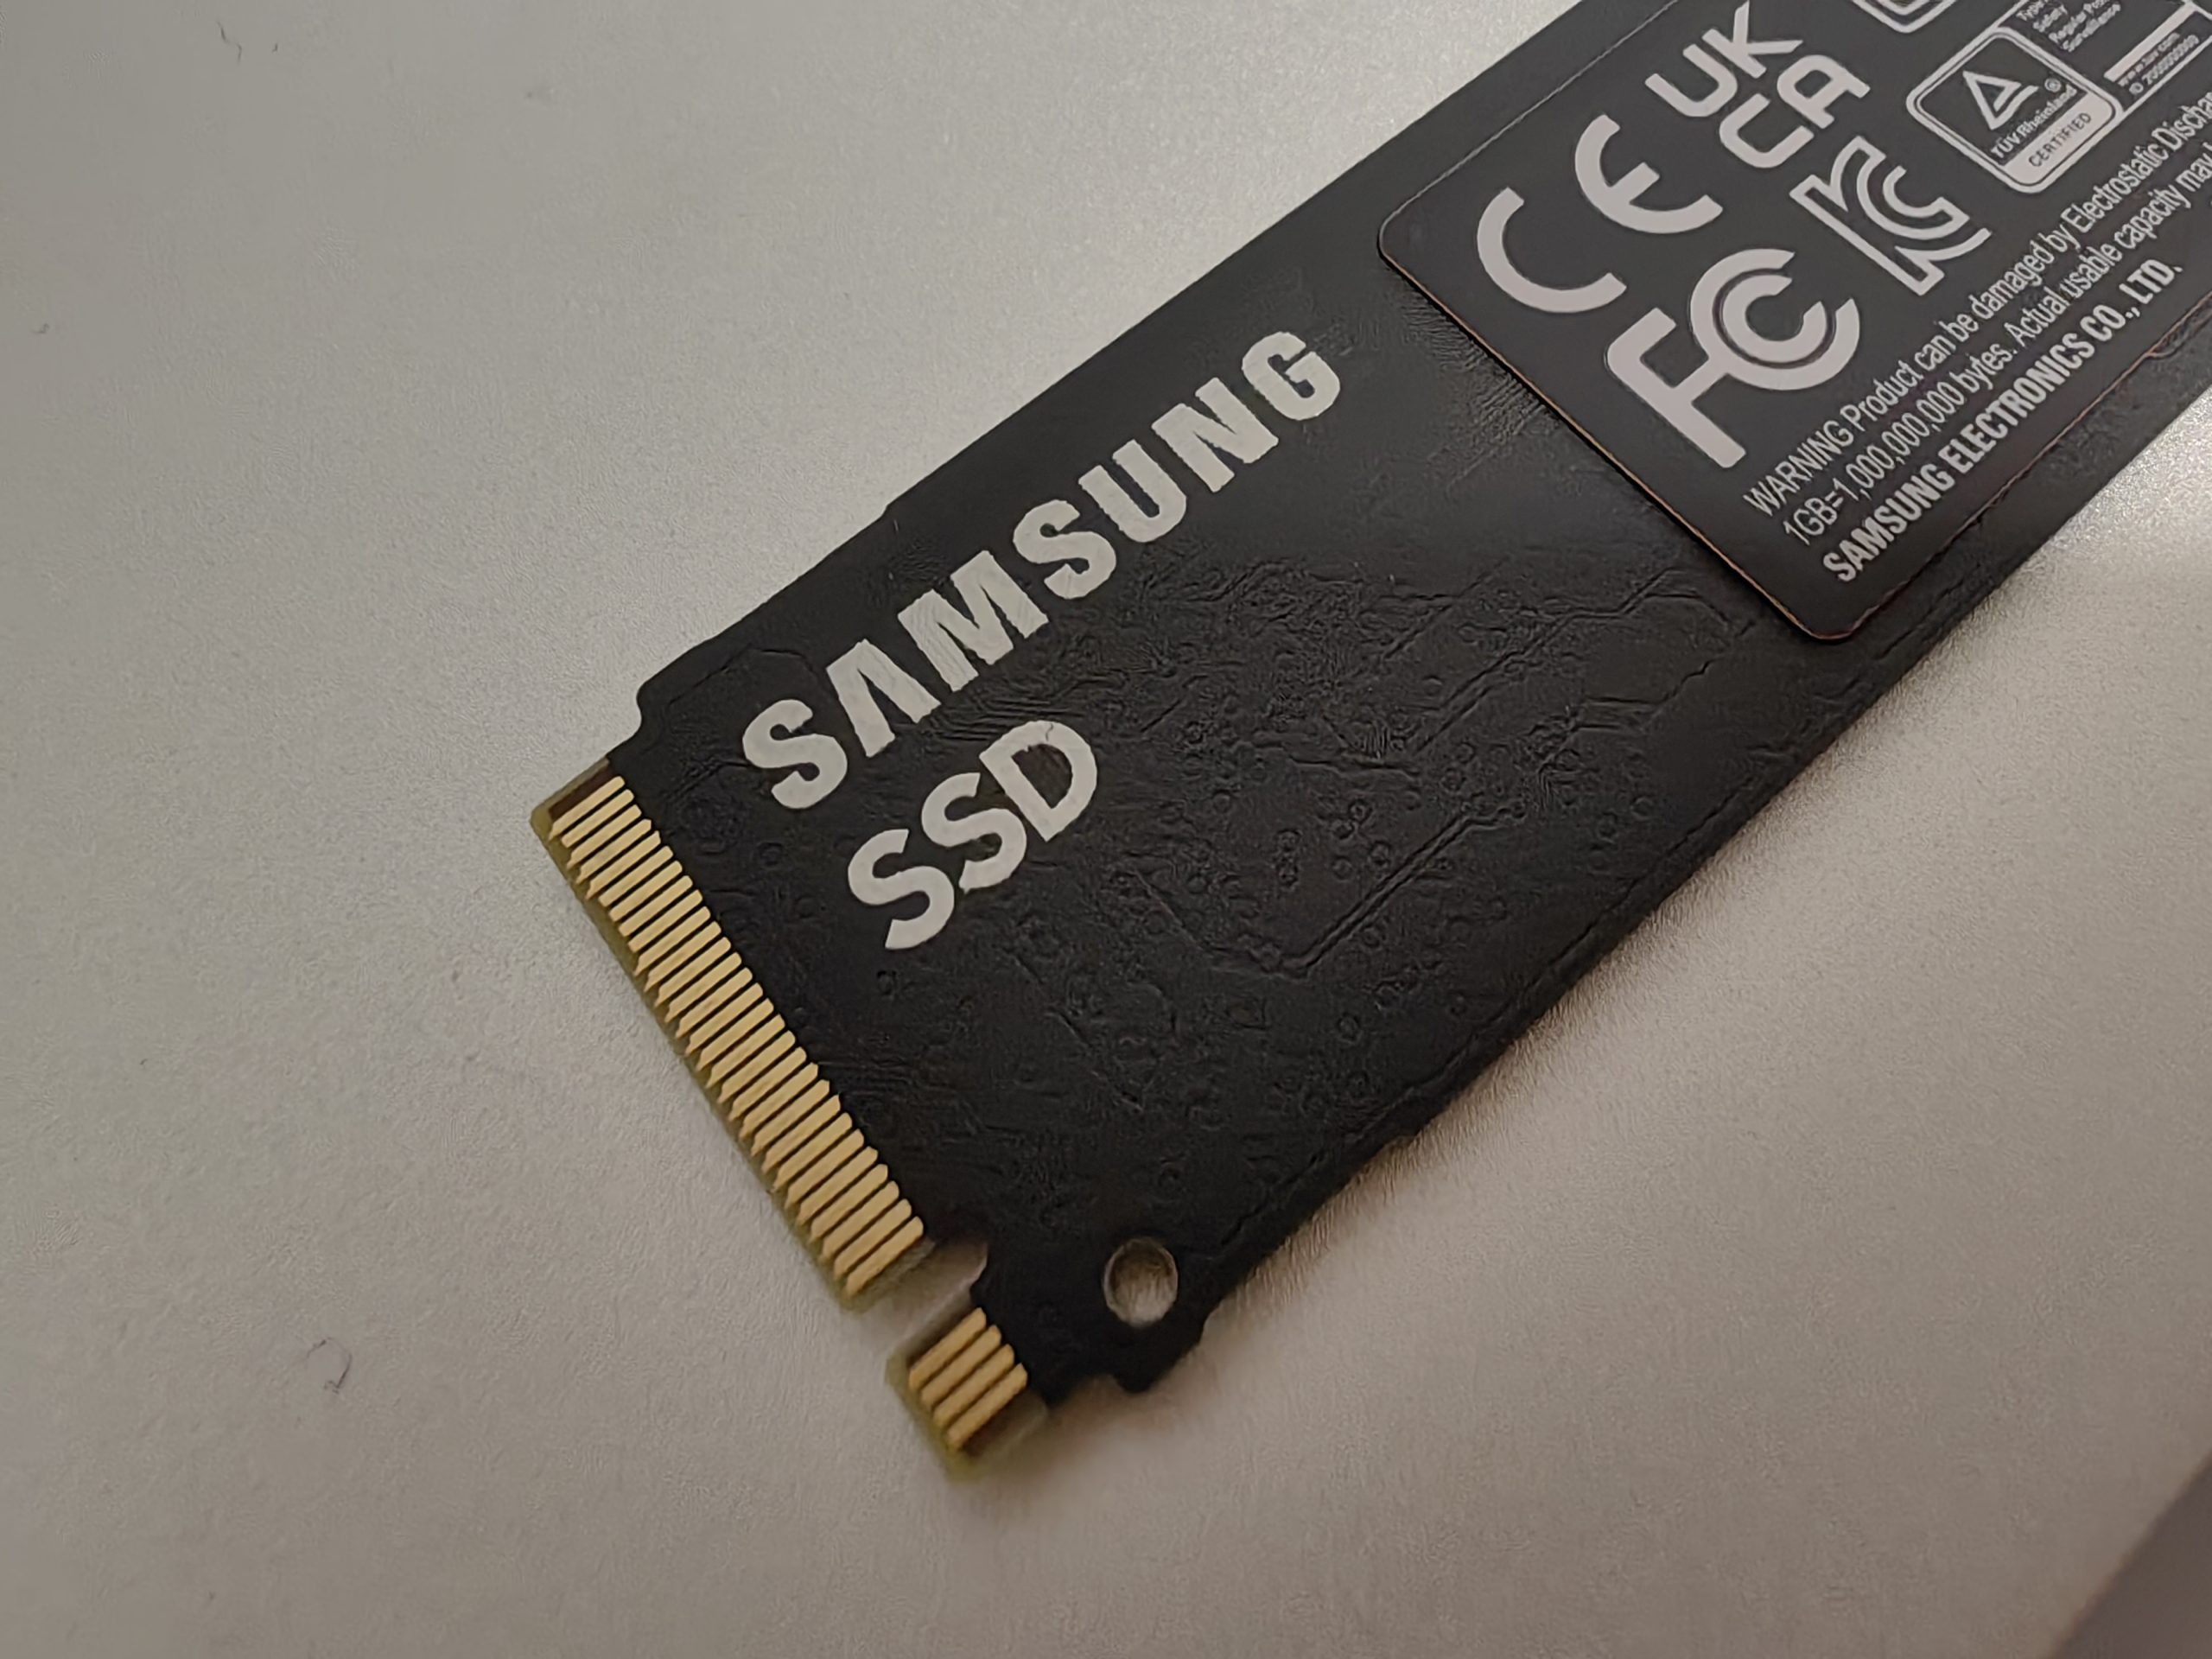  Samsung-980-SSD-disk-test-review-14